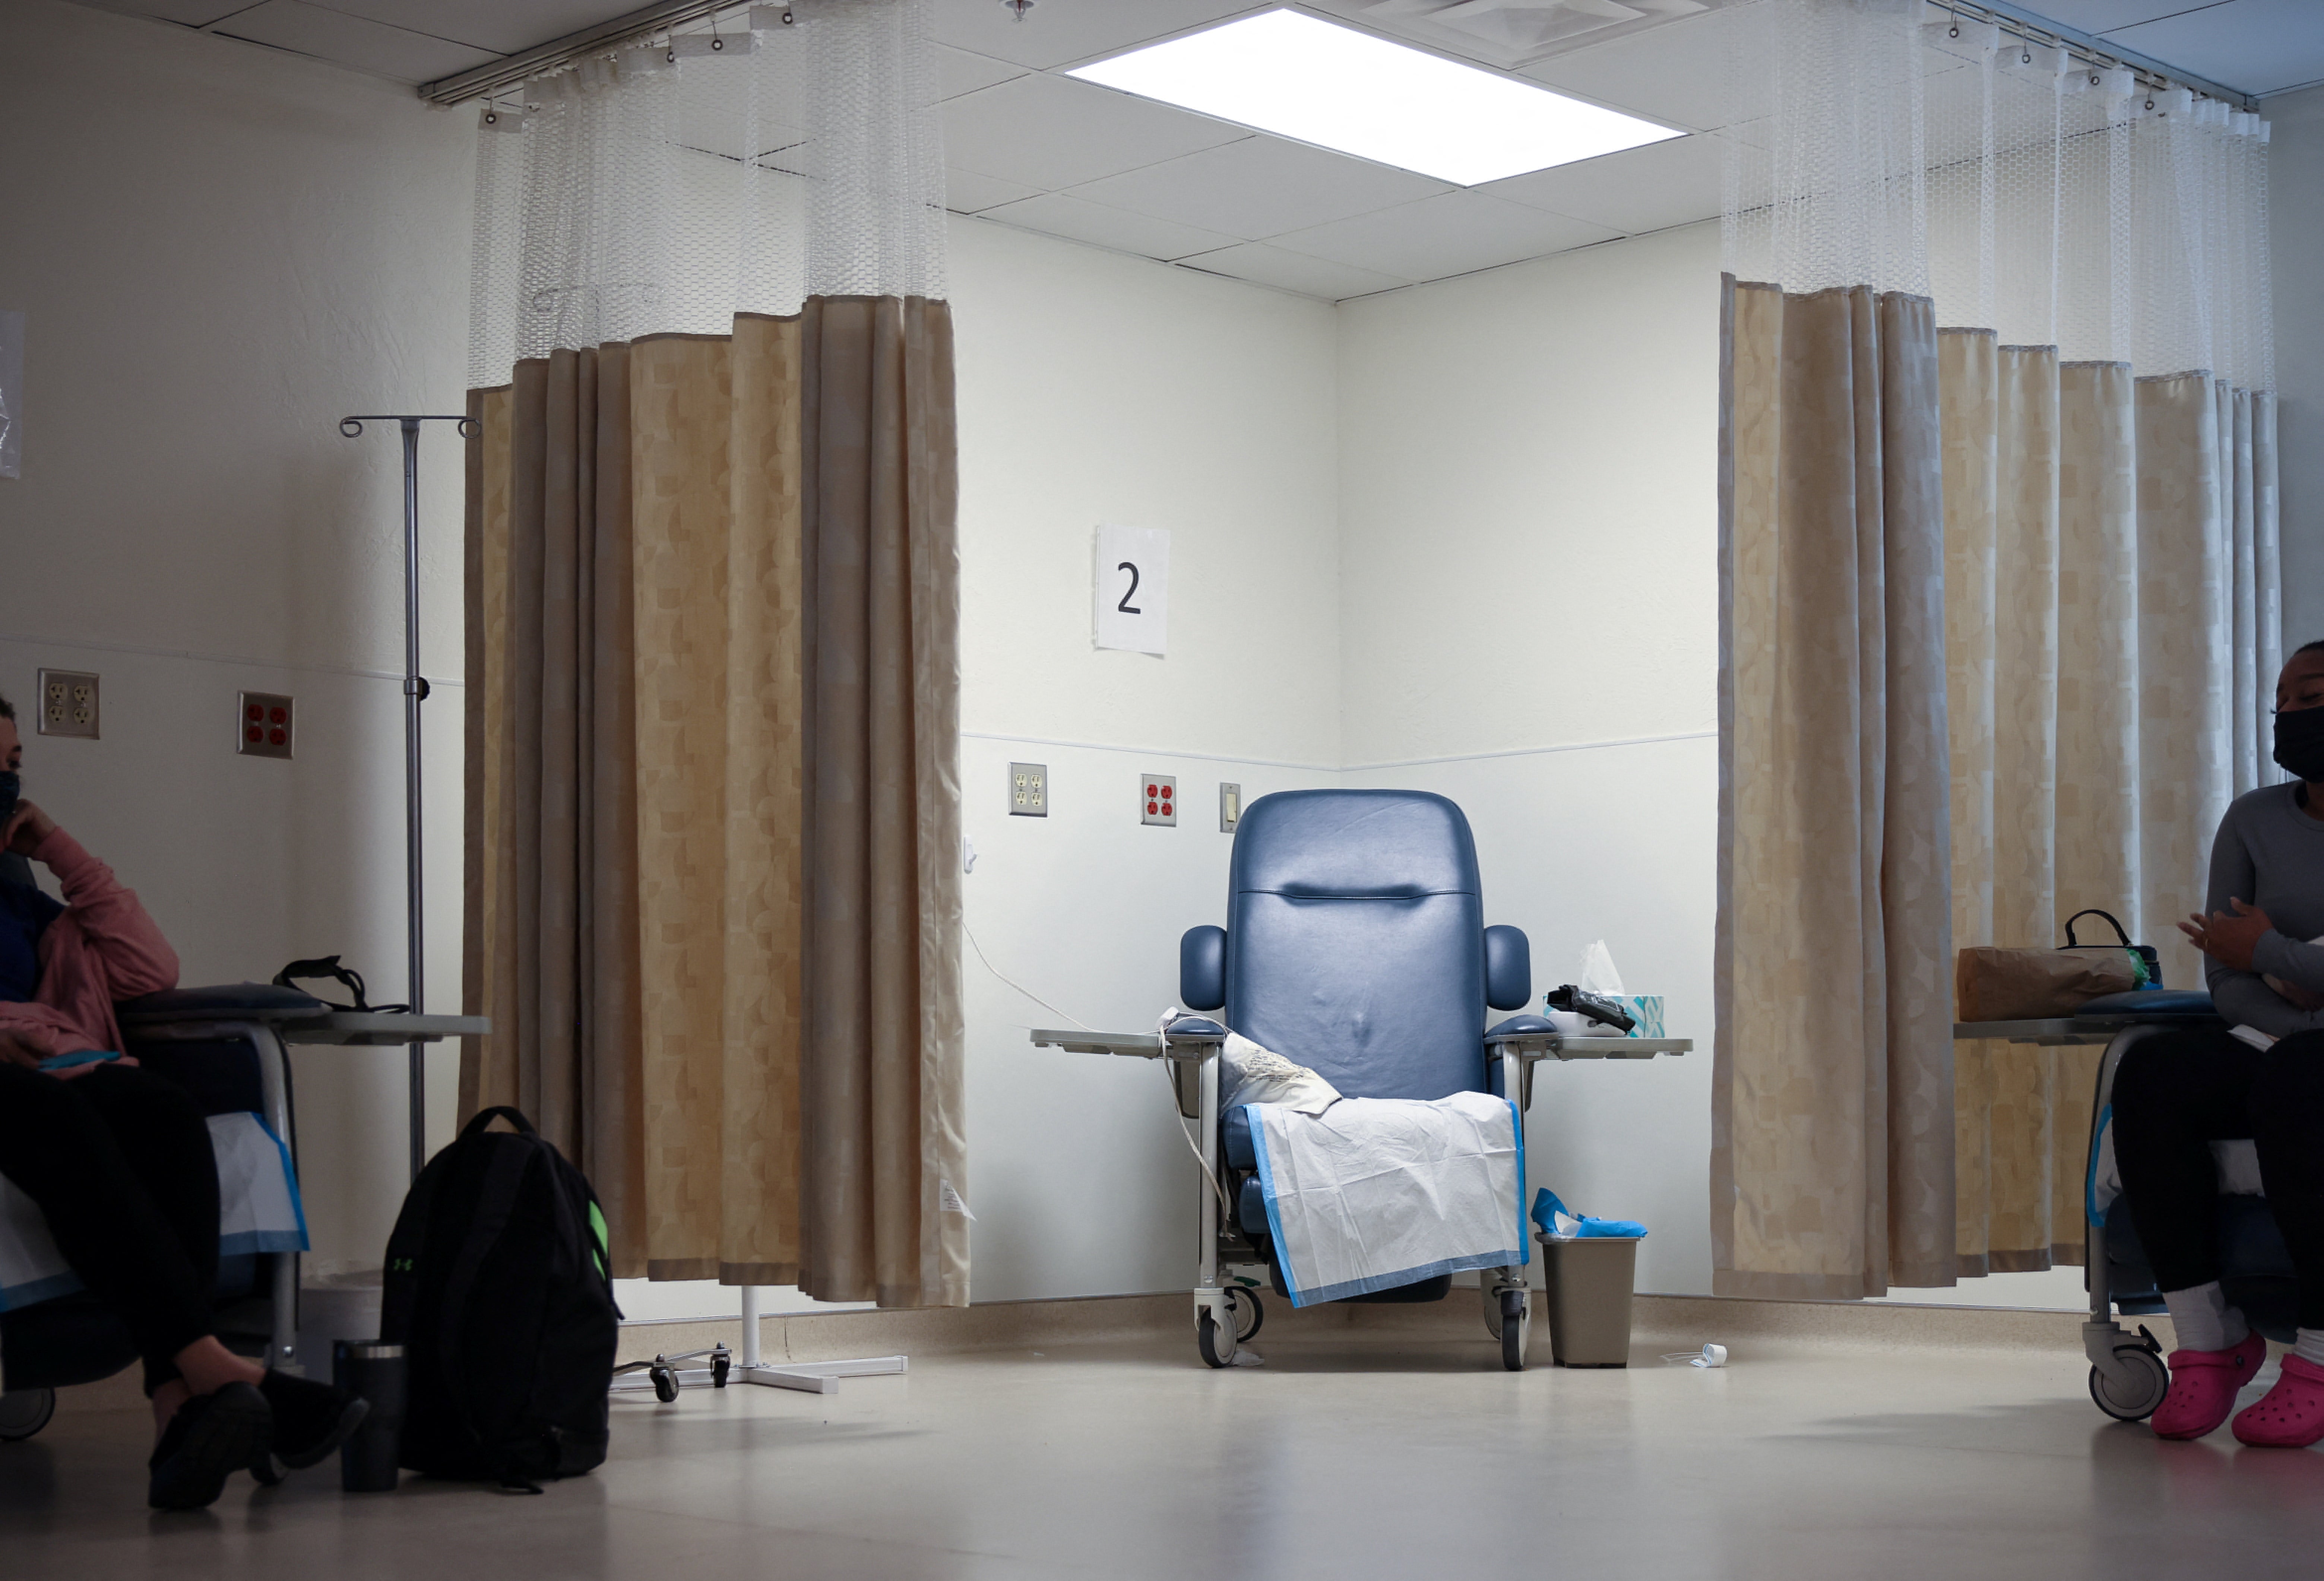 Two women from Texas talk to each other about their travel to Oklahoma as they wait in the recovery room following their abortions at the Trust Women clinic